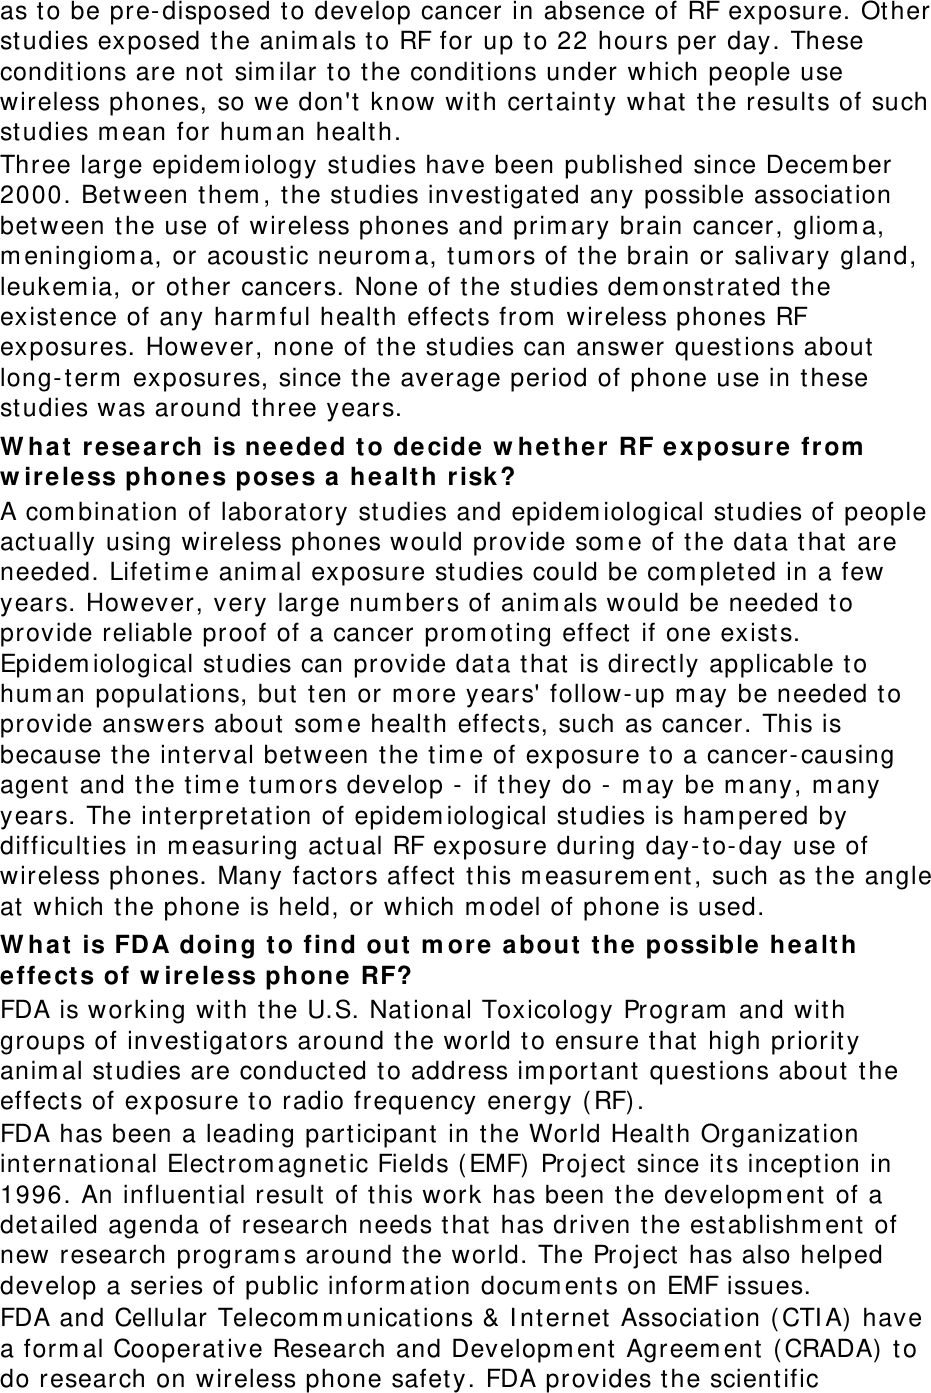 as to be pre-disposed to develop cancer in absence of RF exposure. Other studies exposed the animals to RF for up to 22 hours per day. These conditions are not similar to the conditions under which people use wireless phones, so we don&apos;t know with certainty what the results of such studies mean for human health. Three large epidemiology studies have been published since December 2000. Between them, the studies investigated any possible association between the use of wireless phones and primary brain cancer, glioma, meningioma, or acoustic neuroma, tumors of the brain or salivary gland, leukemia, or other cancers. None of the studies demonstrated the existence of any harmful health effects from wireless phones RF exposures. However, none of the studies can answer questions about long-term exposures, since the average period of phone use in these studies was around three years. What research is needed to decide whether RF exposure from wireless phones poses a health risk? A combination of laboratory studies and epidemiological studies of people actually using wireless phones would provide some of the data that are needed. Lifetime animal exposure studies could be completed in a few years. However, very large numbers of animals would be needed to provide reliable proof of a cancer promoting effect if one exists. Epidemiological studies can provide data that is directly applicable to human populations, but ten or more years&apos; follow-up may be needed to provide answers about some health effects, such as cancer. This is because the interval between the time of exposure to a cancer-causing agent and the time tumors develop - if they do - may be many, many years. The interpretation of epidemiological studies is hampered by difficulties in measuring actual RF exposure during day-to-day use of wireless phones. Many factors affect this measurement, such as the angle at which the phone is held, or which model of phone is used. What is FDA doing to find out more about the possible health effects of wireless phone RF? FDA is working with the U.S. National Toxicology Program and with groups of investigators around the world to ensure that high priority animal studies are conducted to address important questions about the effects of exposure to radio frequency energy (RF). FDA has been a leading participant in the World Health Organization international Electromagnetic Fields (EMF) Project since its inception in 1996. An influential result of this work has been the development of a detailed agenda of research needs that has driven the establishment of new research programs around the world. The Project has also helped develop a series of public information documents on EMF issues. FDA and Cellular Telecommunications &amp; Internet Association (CTIA) have a formal Cooperative Research and Development Agreement (CRADA) to do research on wireless phone safety. FDA provides the scientific 